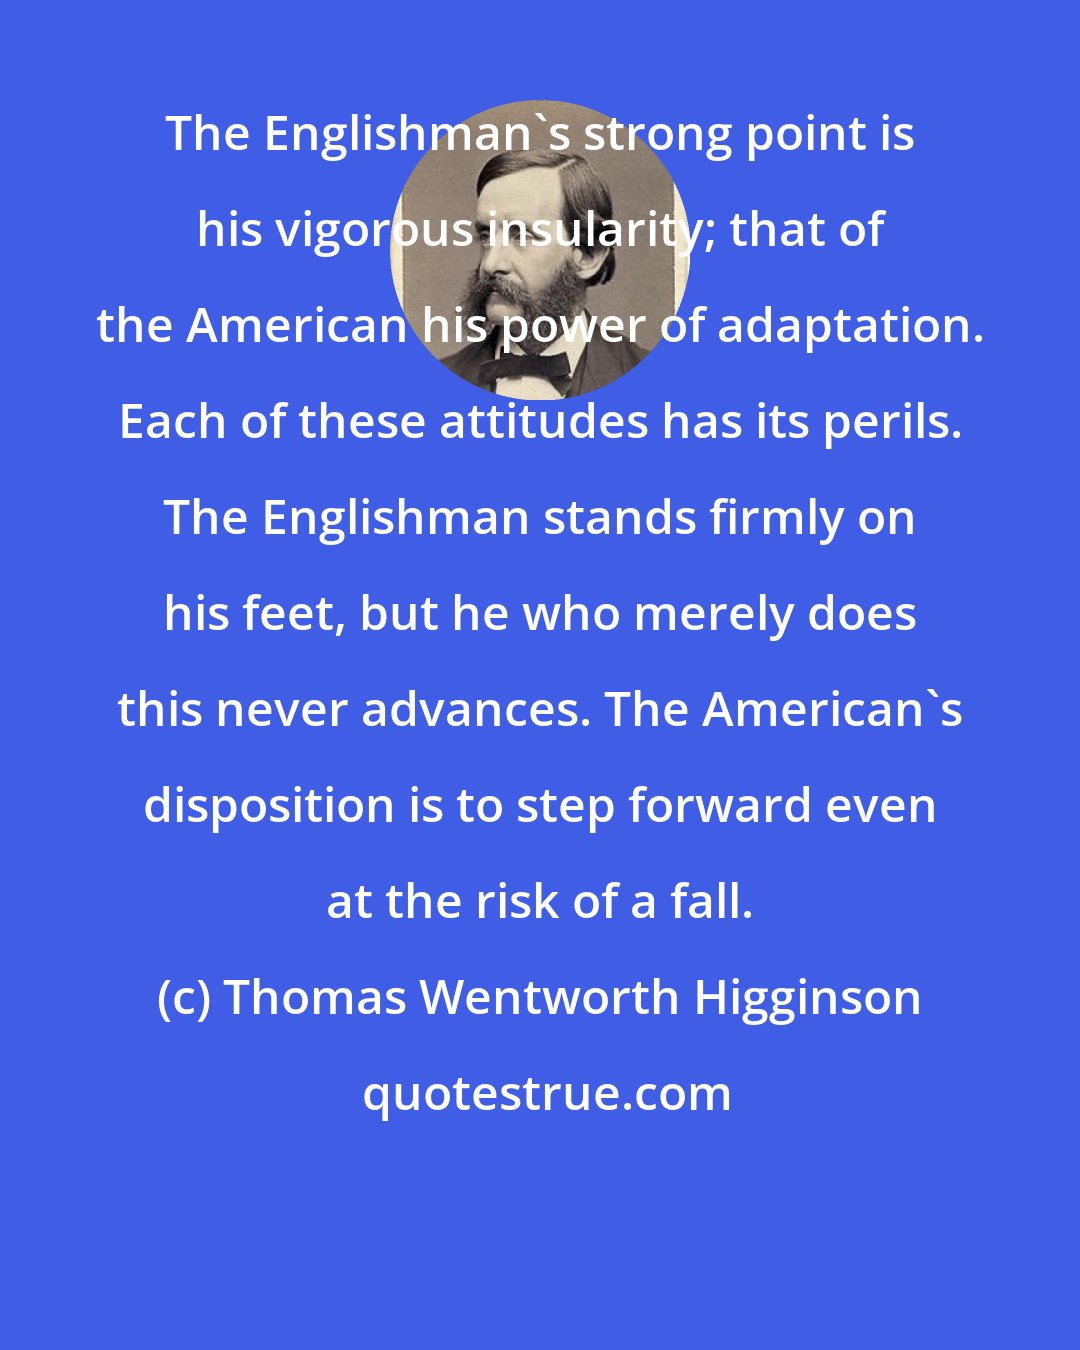 Thomas Wentworth Higginson: The Englishman's strong point is his vigorous insularity; that of the American his power of adaptation. Each of these attitudes has its perils. The Englishman stands firmly on his feet, but he who merely does this never advances. The American's disposition is to step forward even at the risk of a fall.